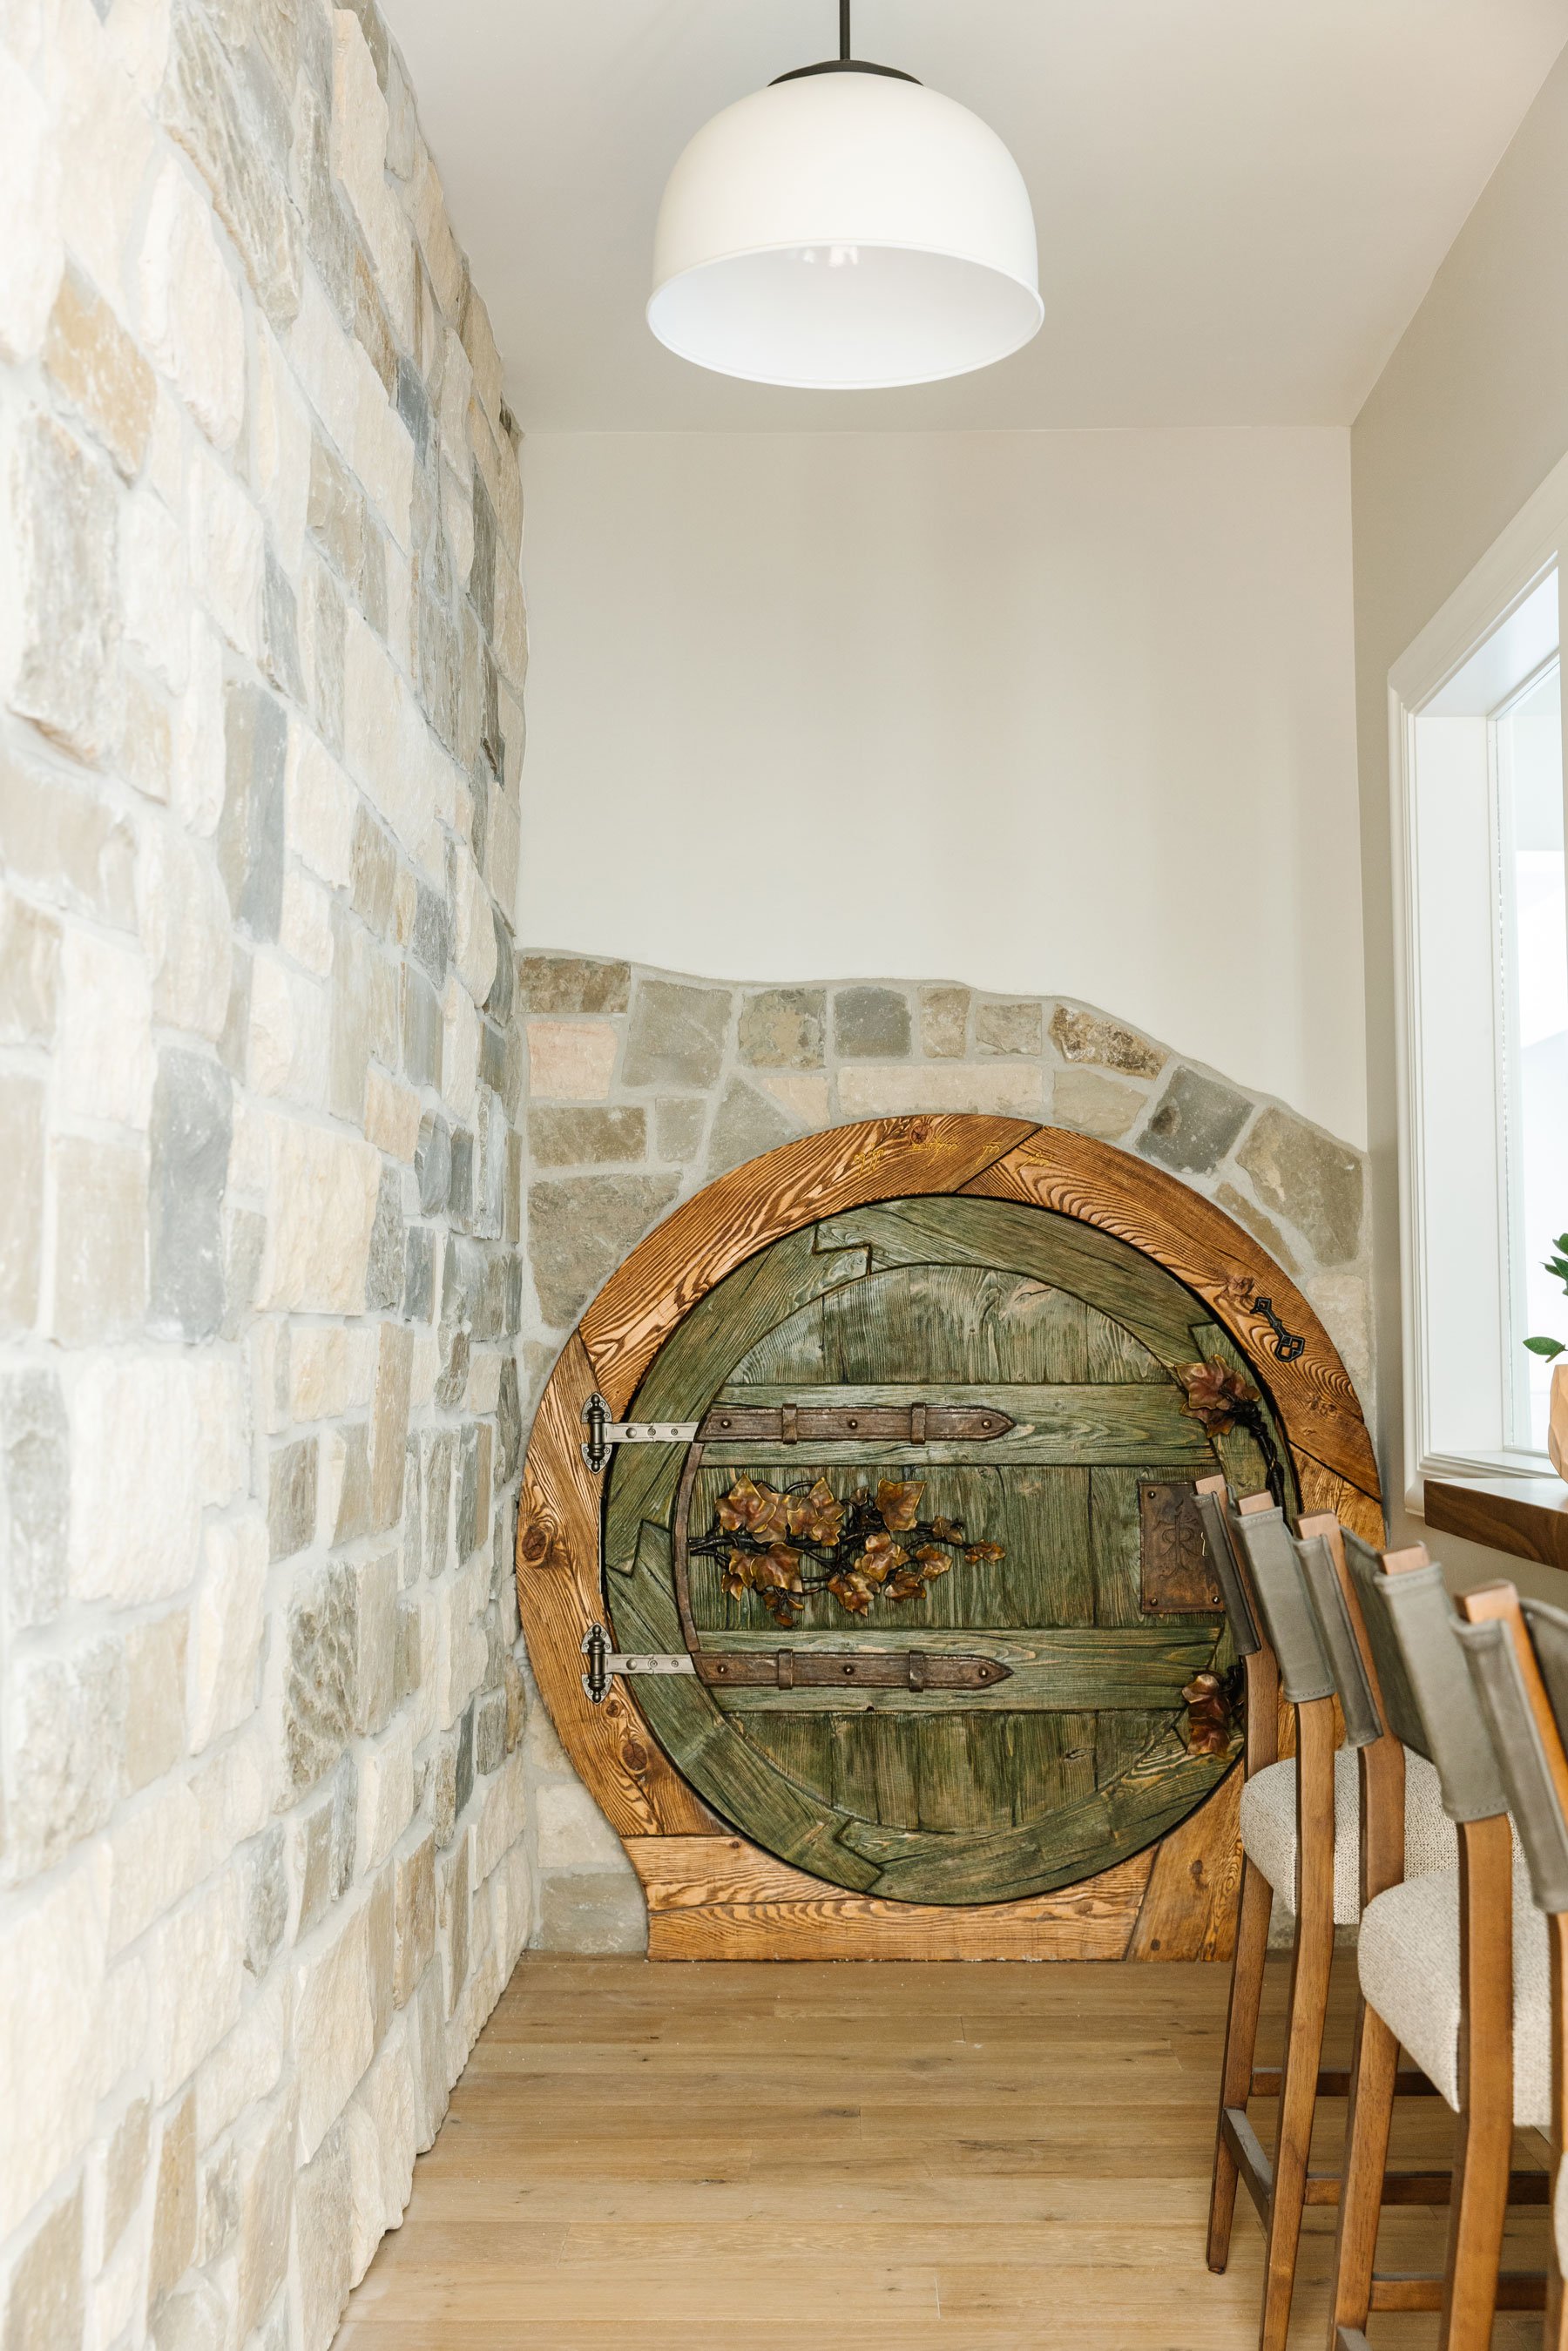  If the hobbit door doesn’t make you feel like you’re about to travel to Middle Earth, the stone cottage pattern on the wall will help promote that feeling. Hobbit door stone cottage wall Lord of the Rings theme room #hobbitdoor #stonecottage #lordof